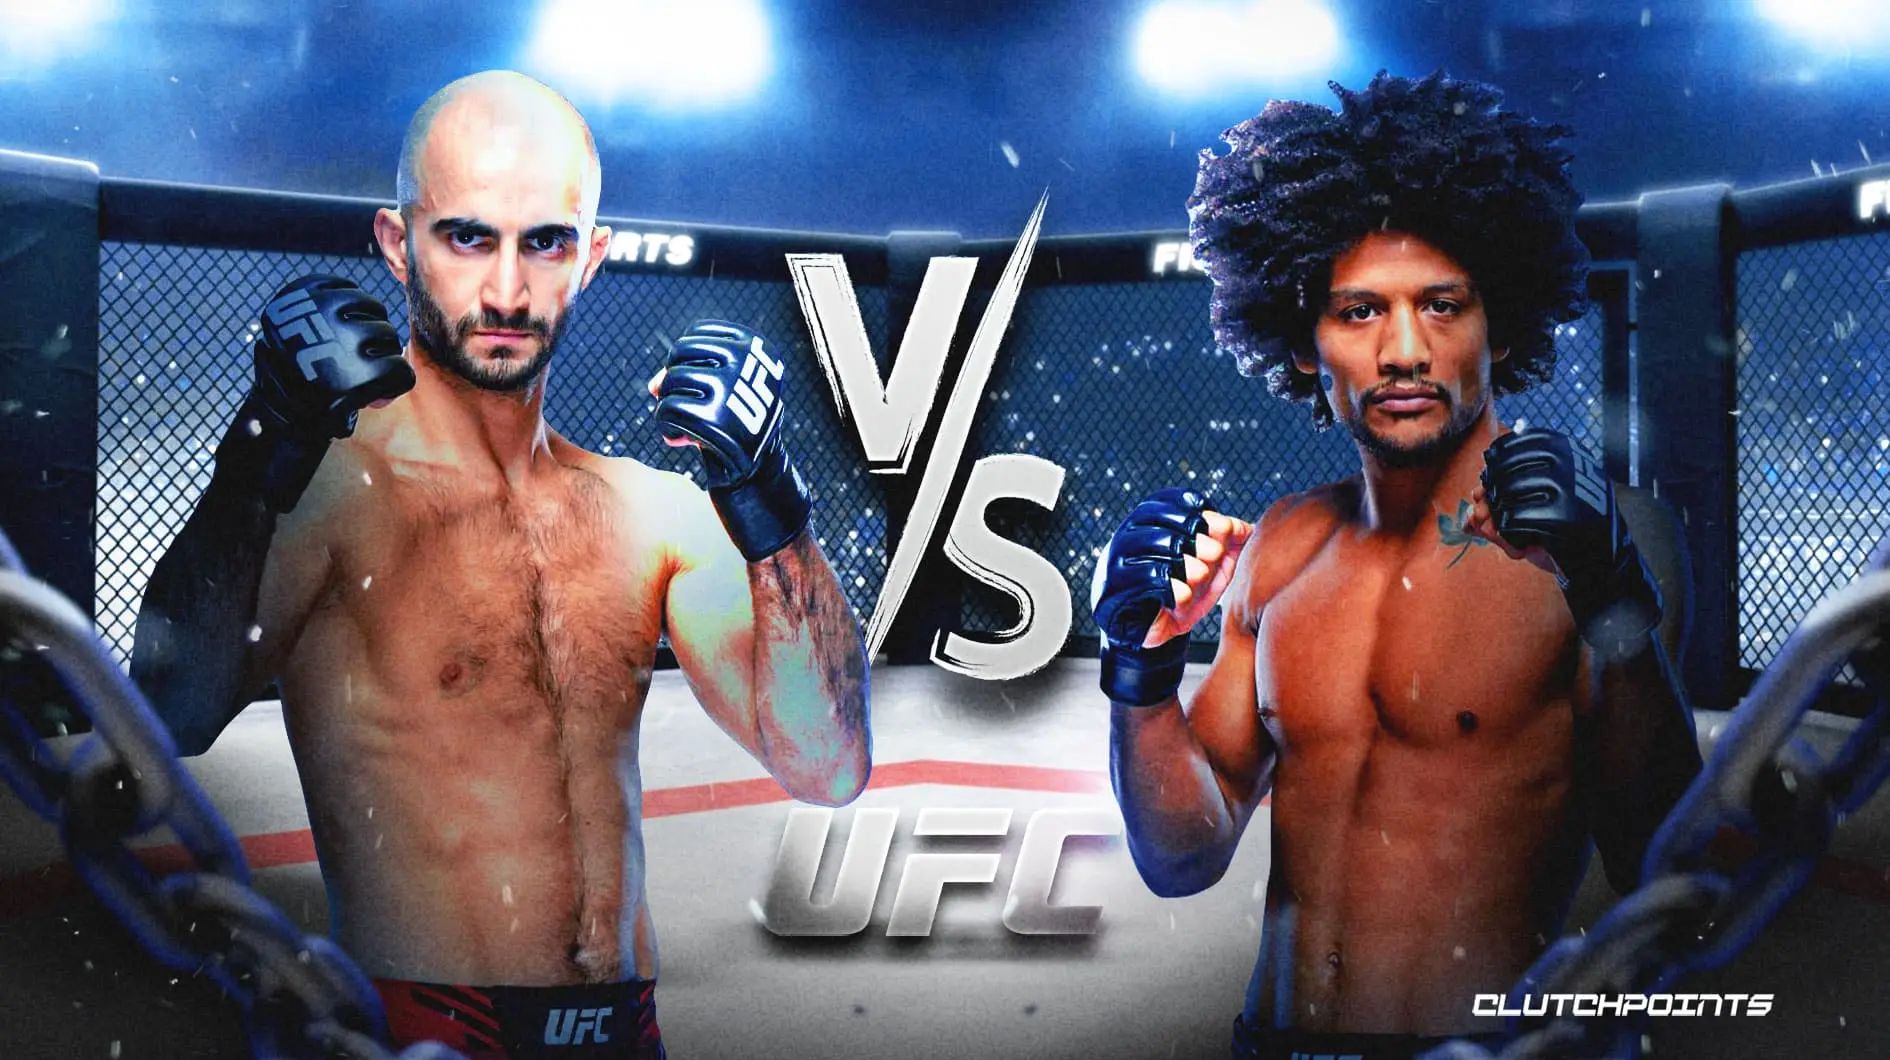 Giga Chikadze vs. Alex Caceres: Preview, Where to Watch and Betting Odds